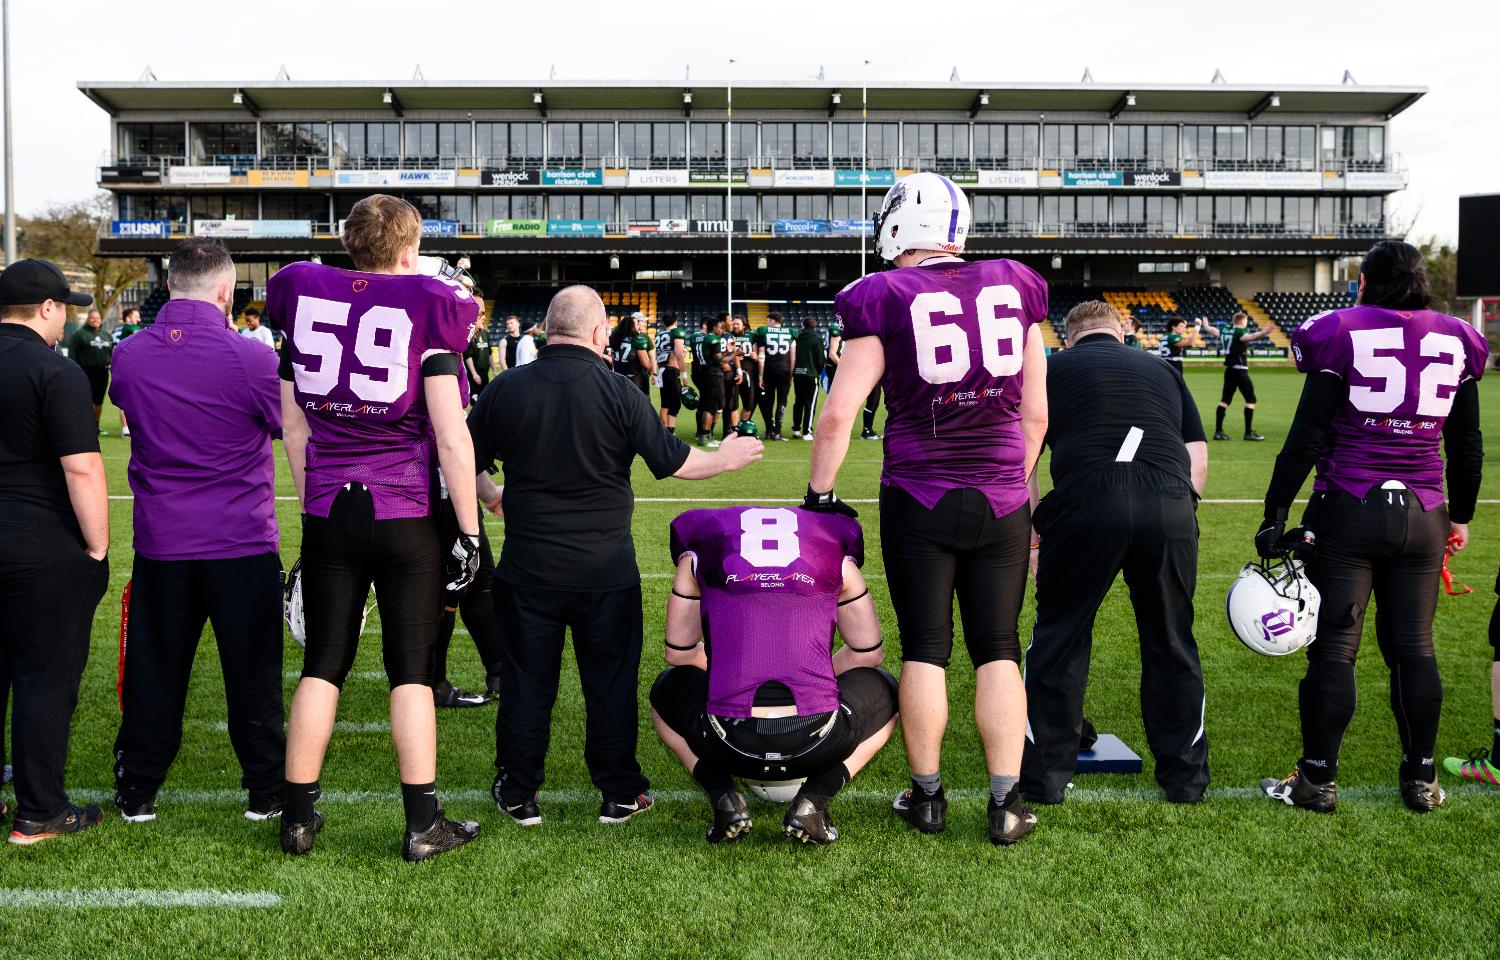 An American football team with their backs to camera